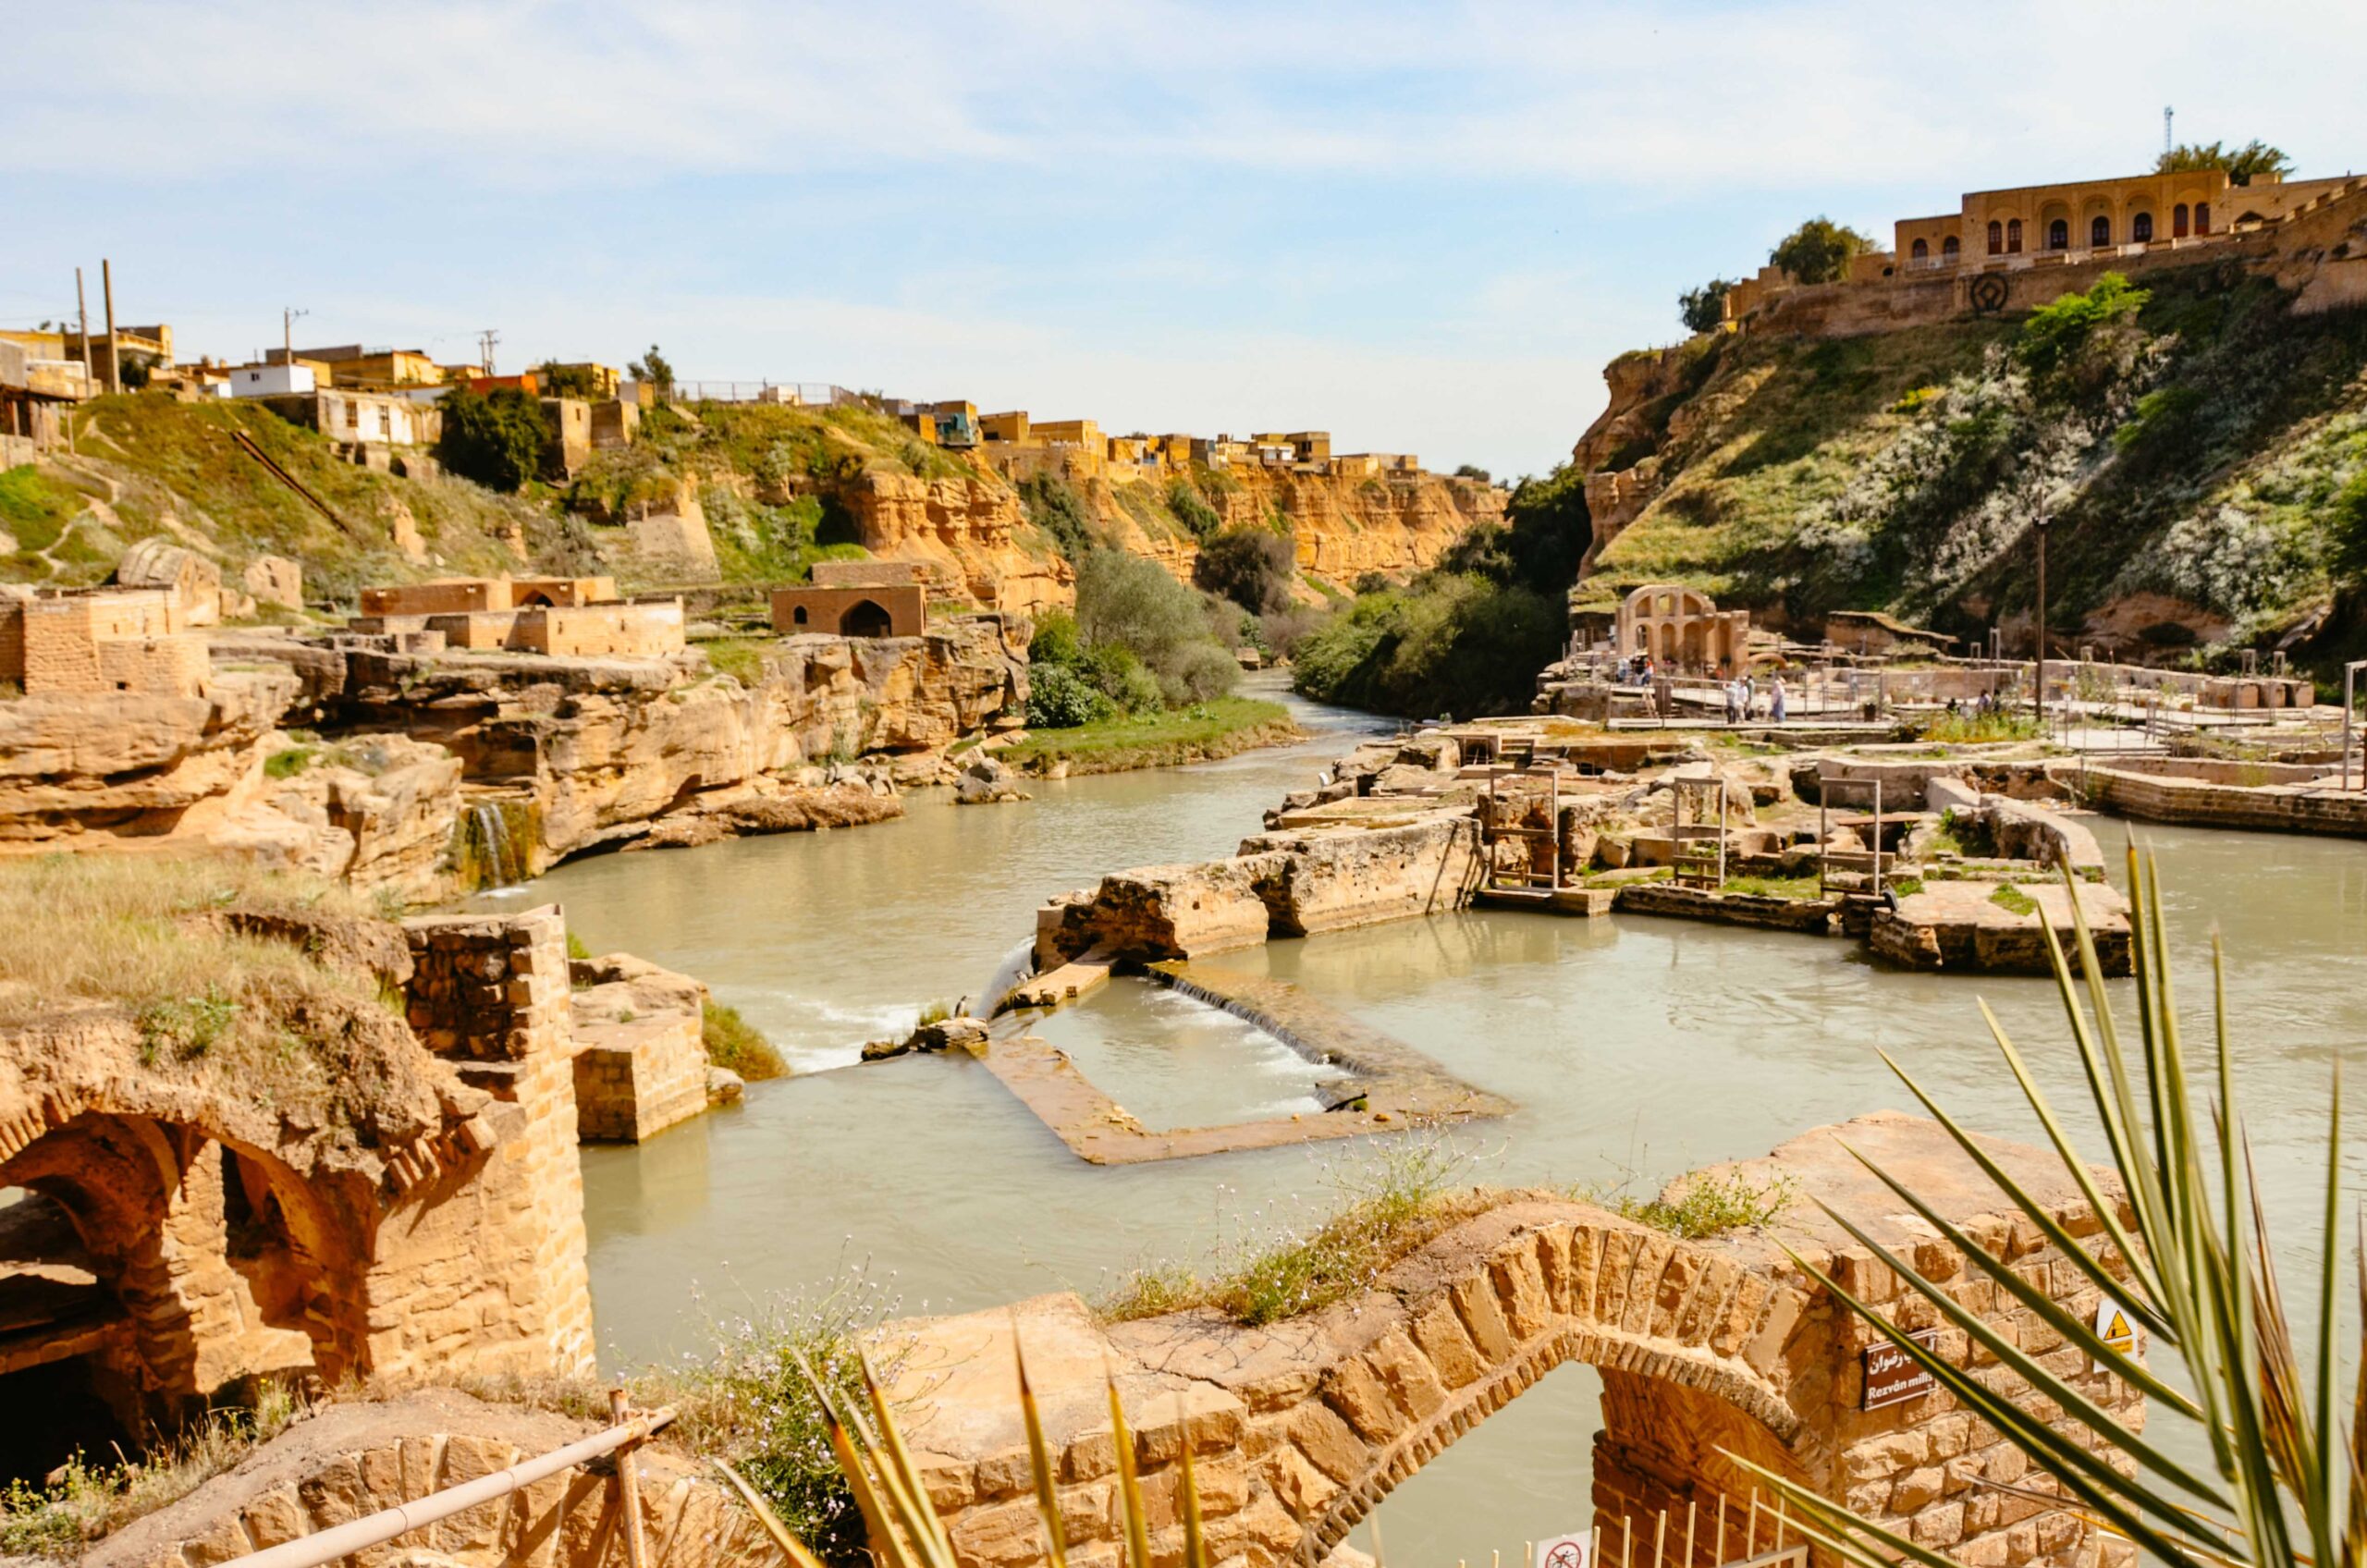 Iran - The historic water-hydraulic system of Shushtar